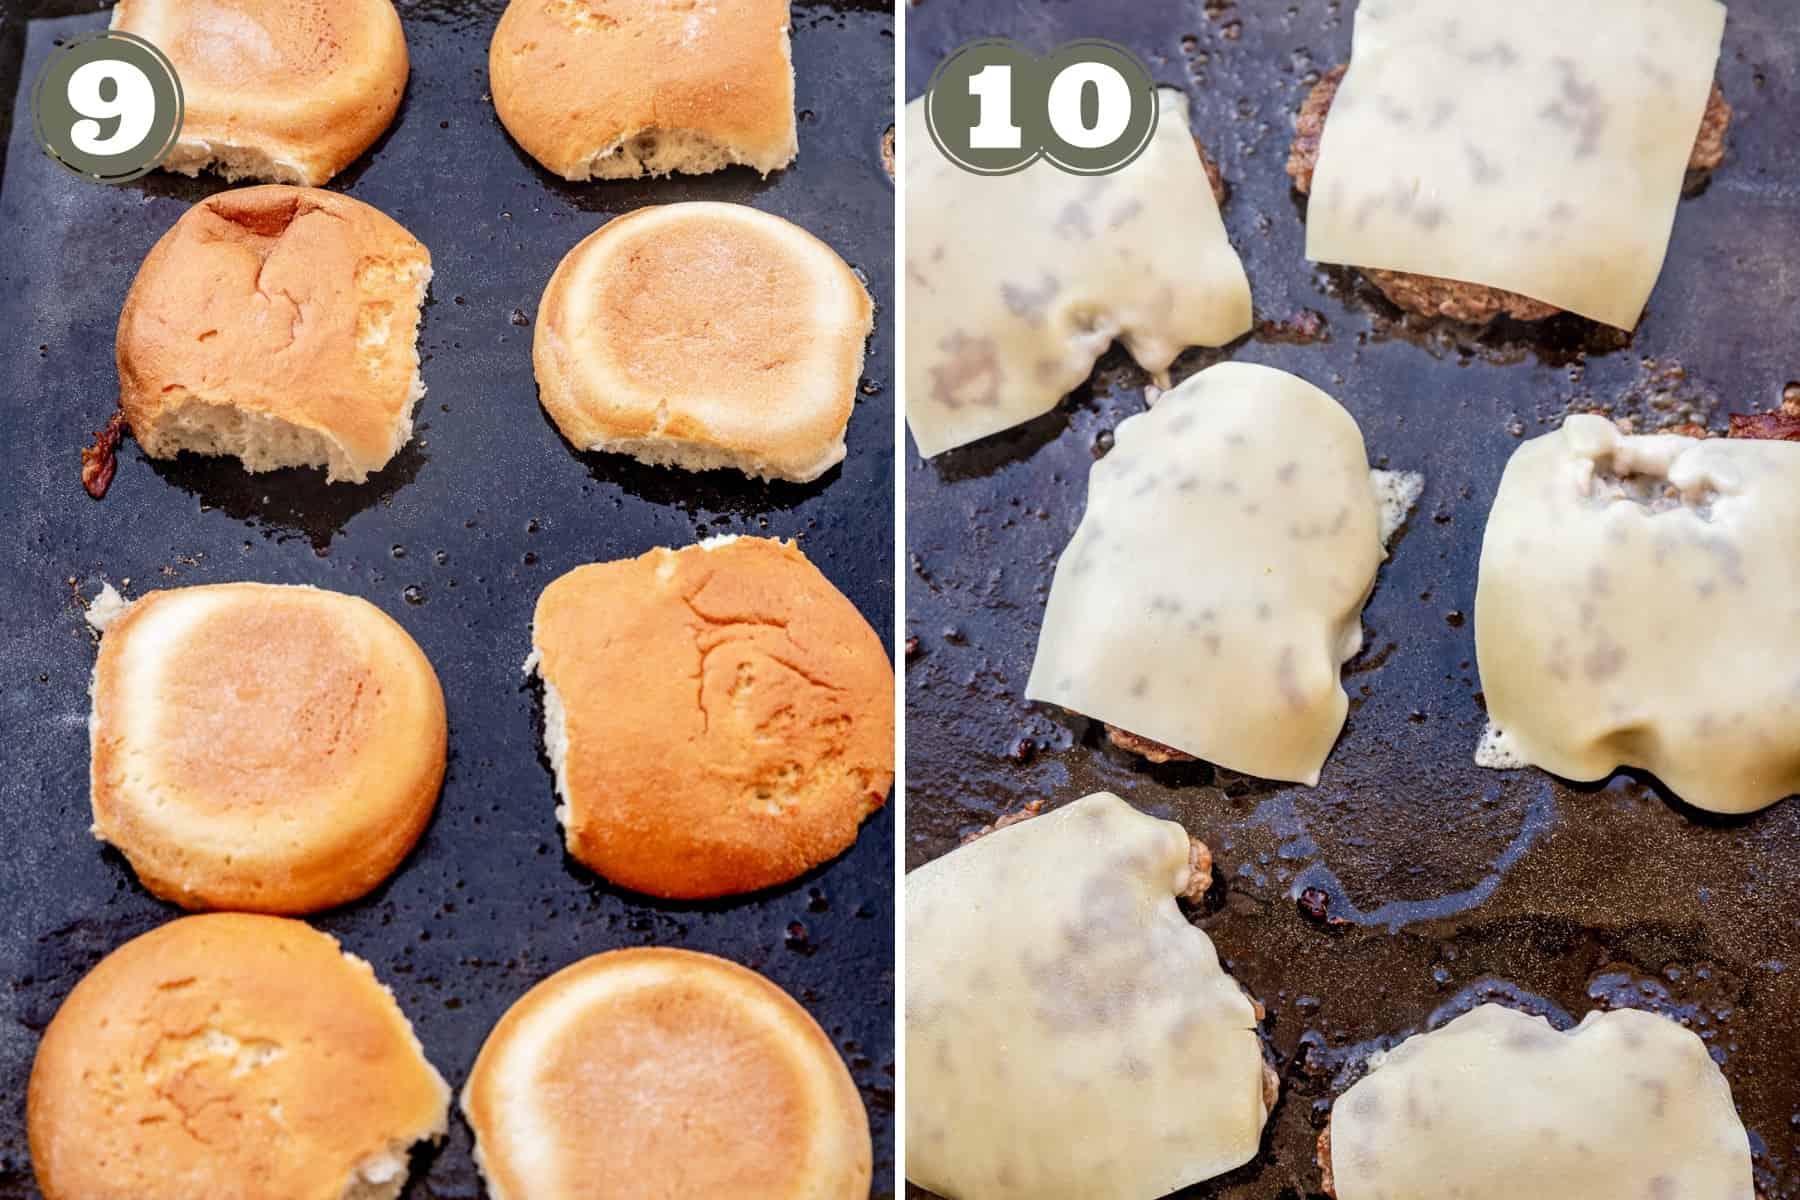 Side by side photos showing hamburger buns toasting on a griddle and smash burgers topped with a slice of cheese.